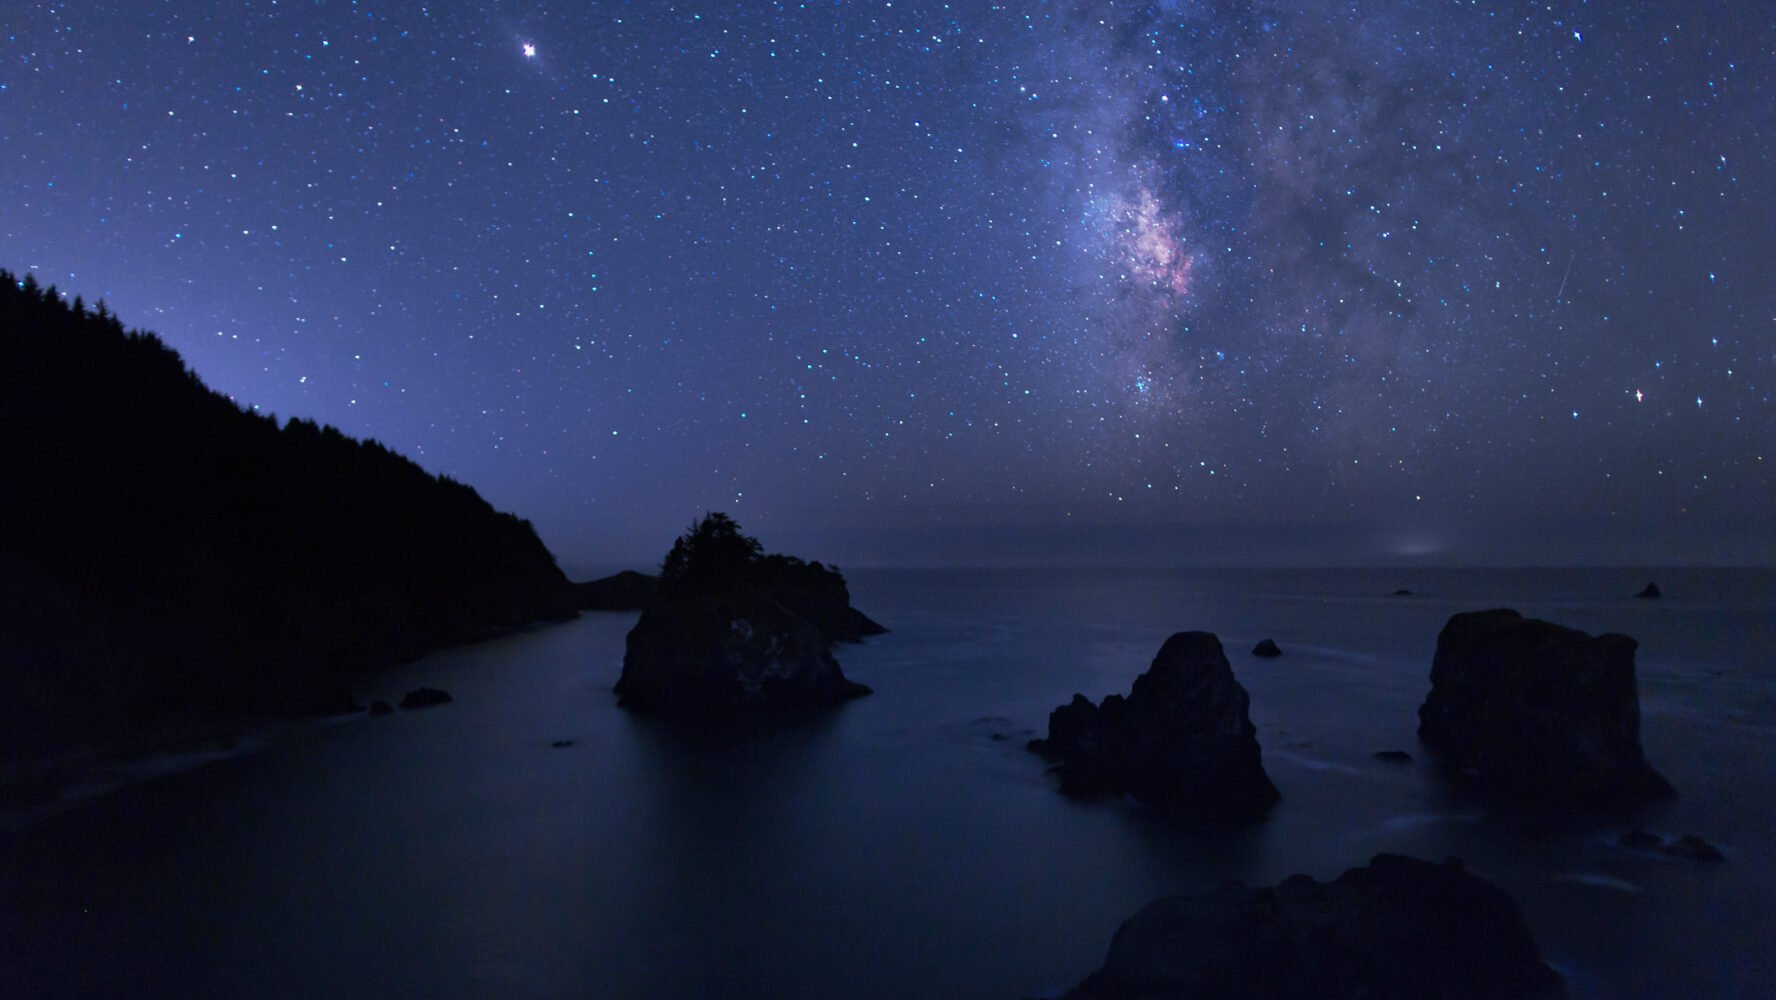 outcrops of cliffs and boulders line a sandy beach, all illuminated by the starry night sky